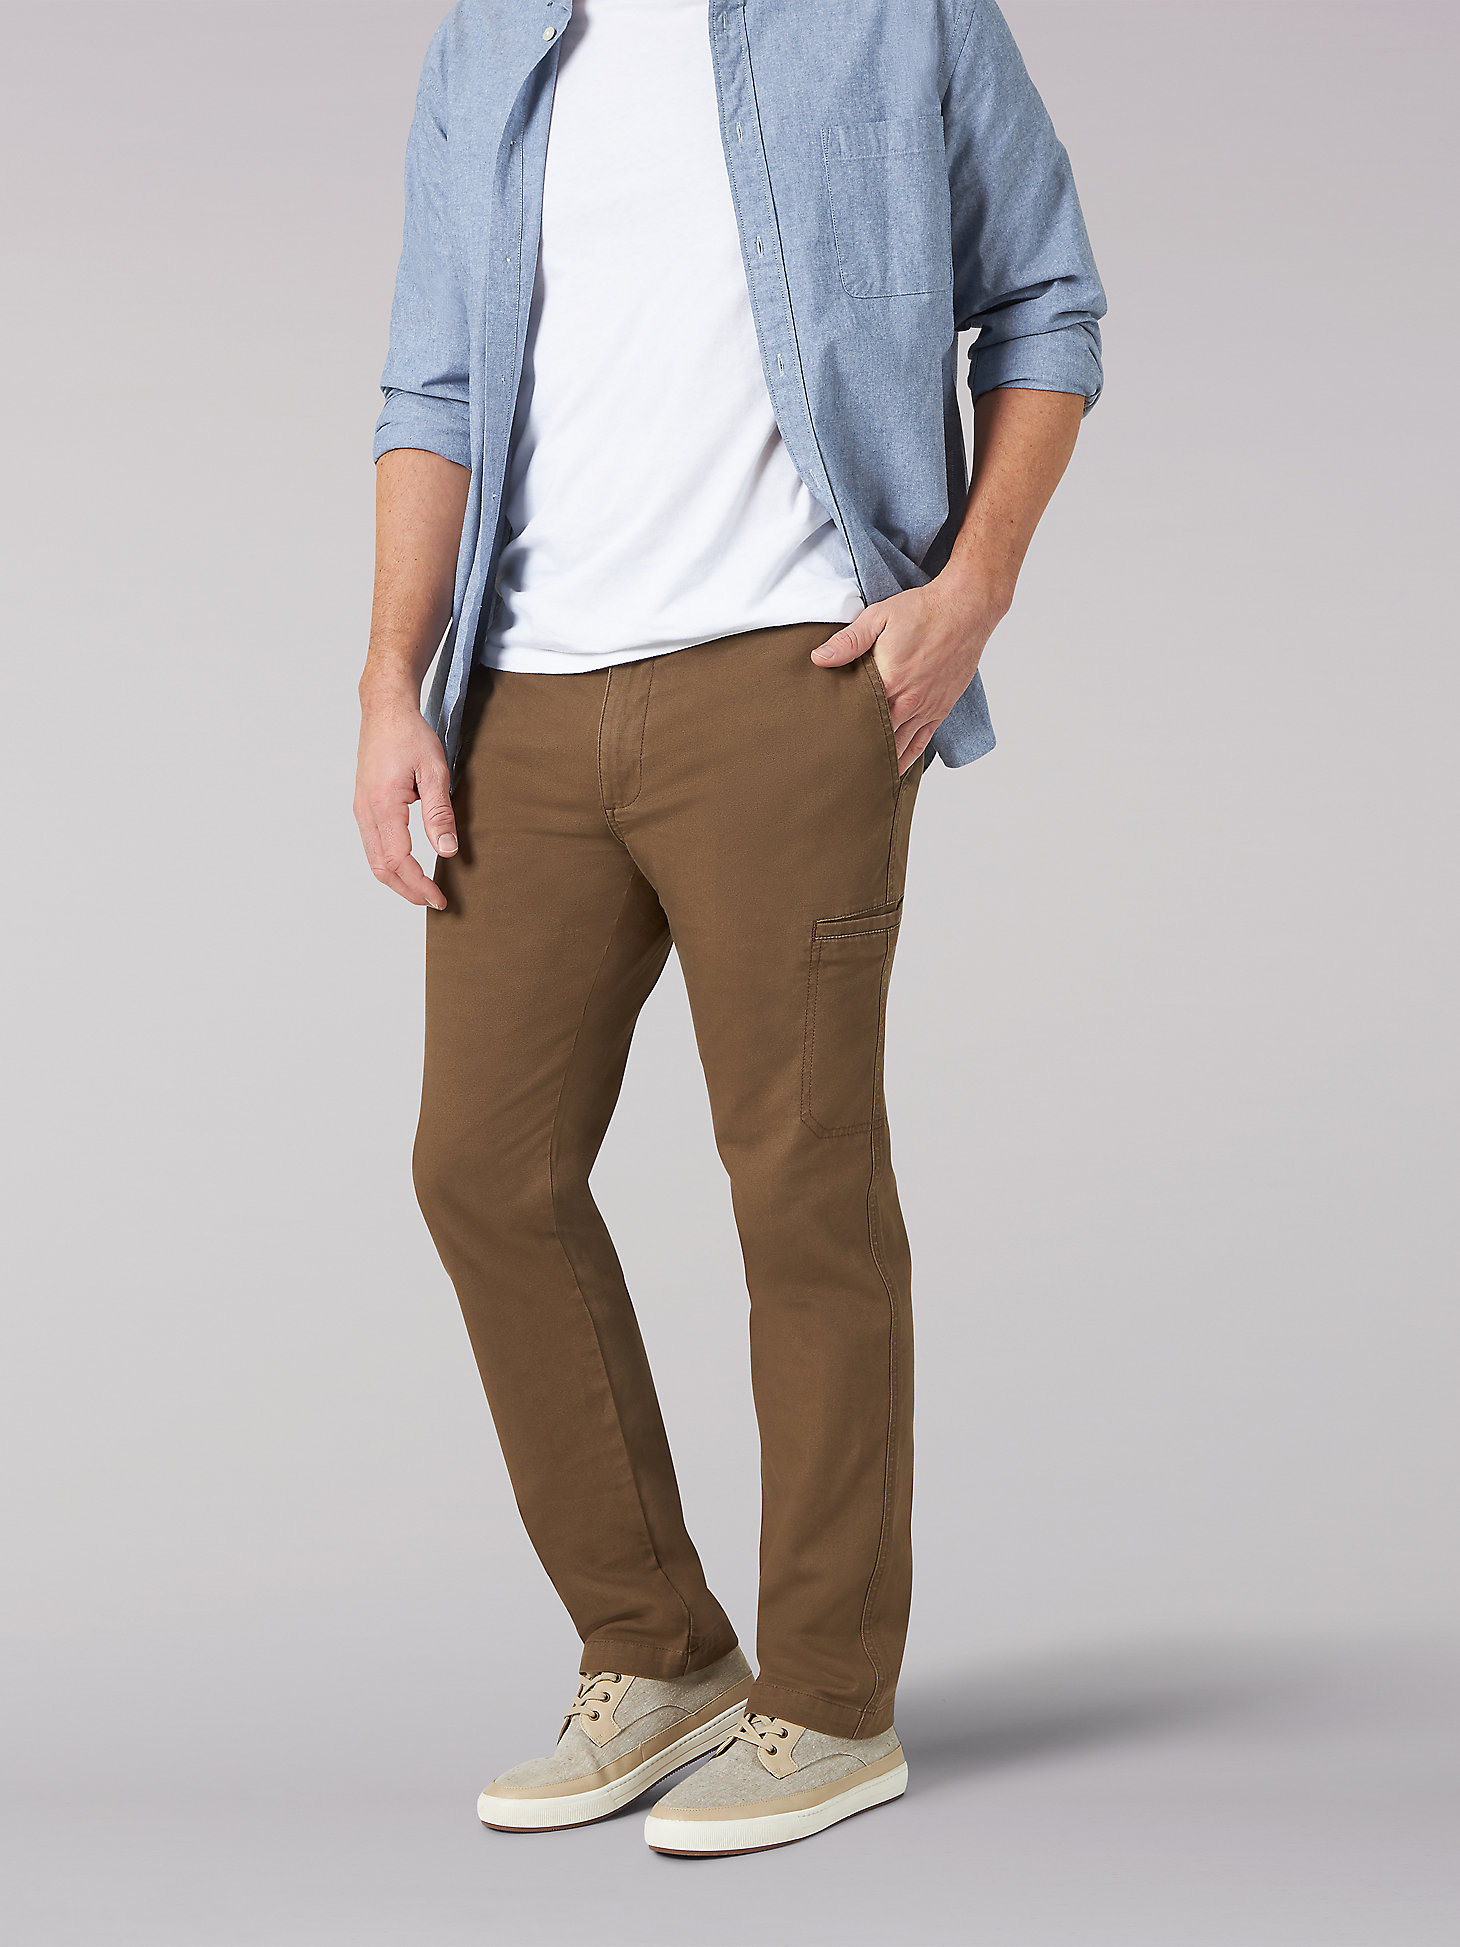 Men’s Extreme Comfort Relaxed Fit Cargo Pant in Teak main view